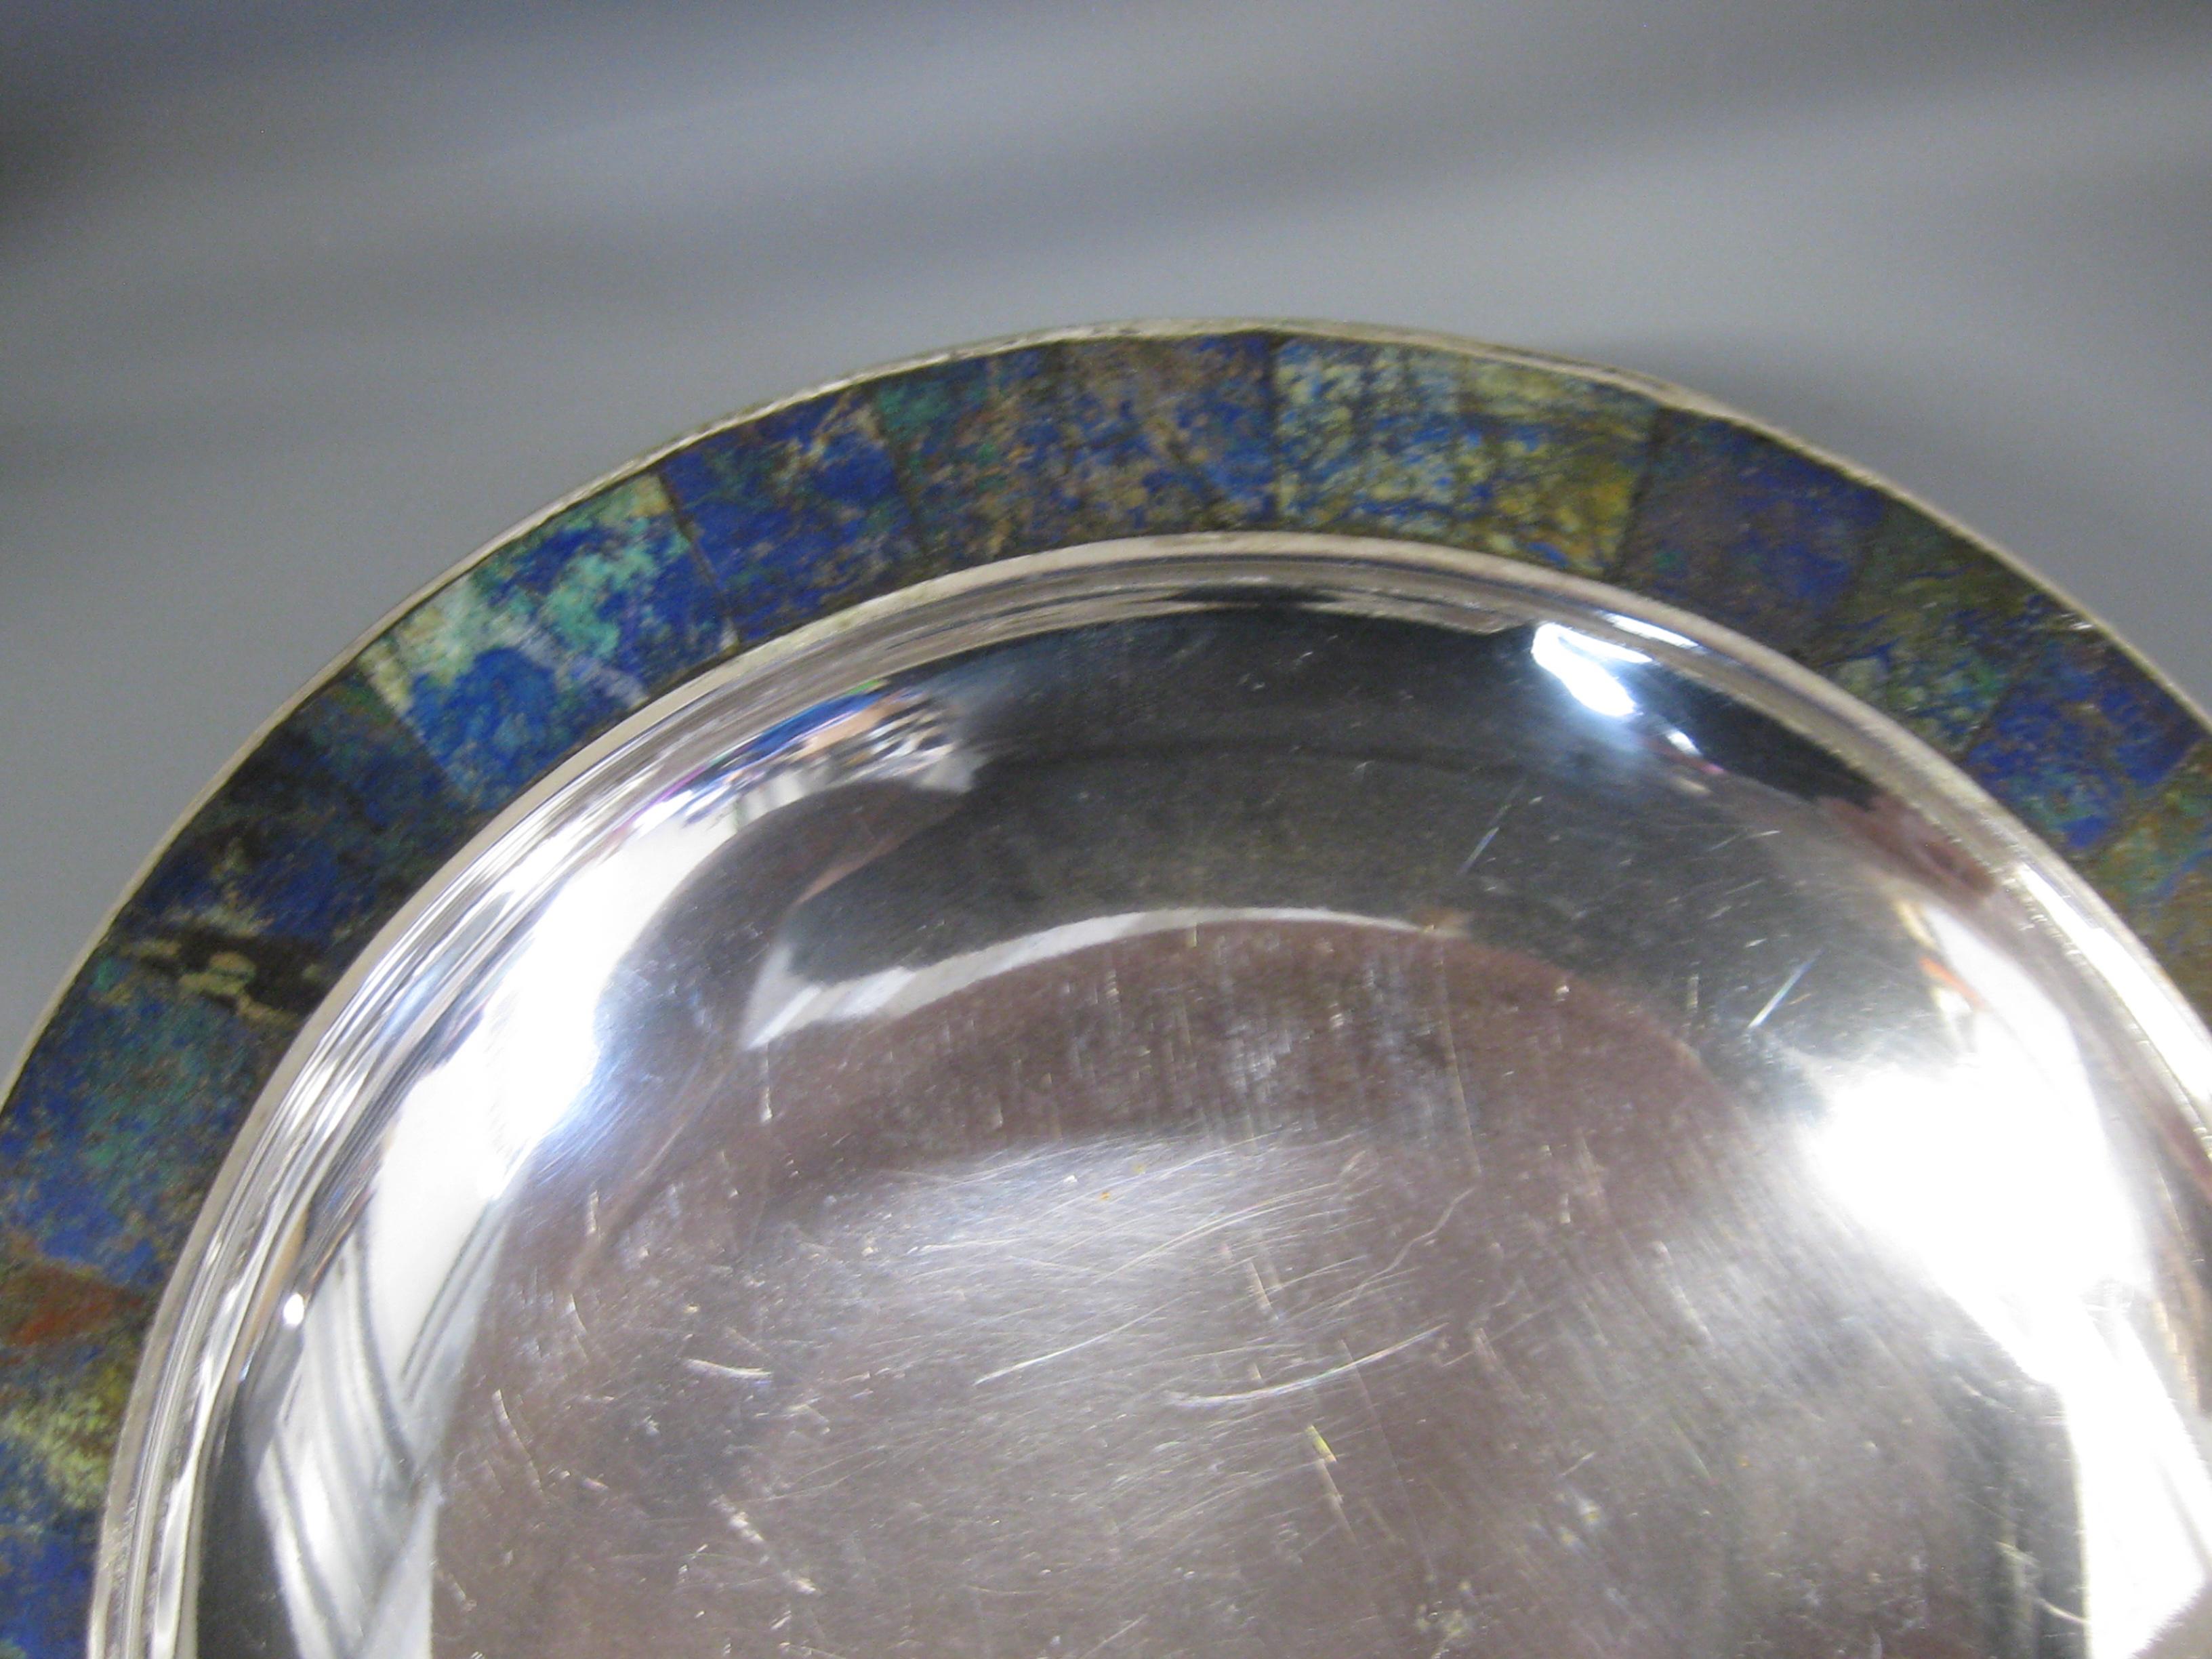 Wonderful silverplated Los Castillos bowl with an inlayed malachite and turquoise edge. This wonderful bowl dates from the 1950's and was made in Taxco, Mexico. Signed on the bottom. Wonderful design and form. In nice condition for its age. No chips